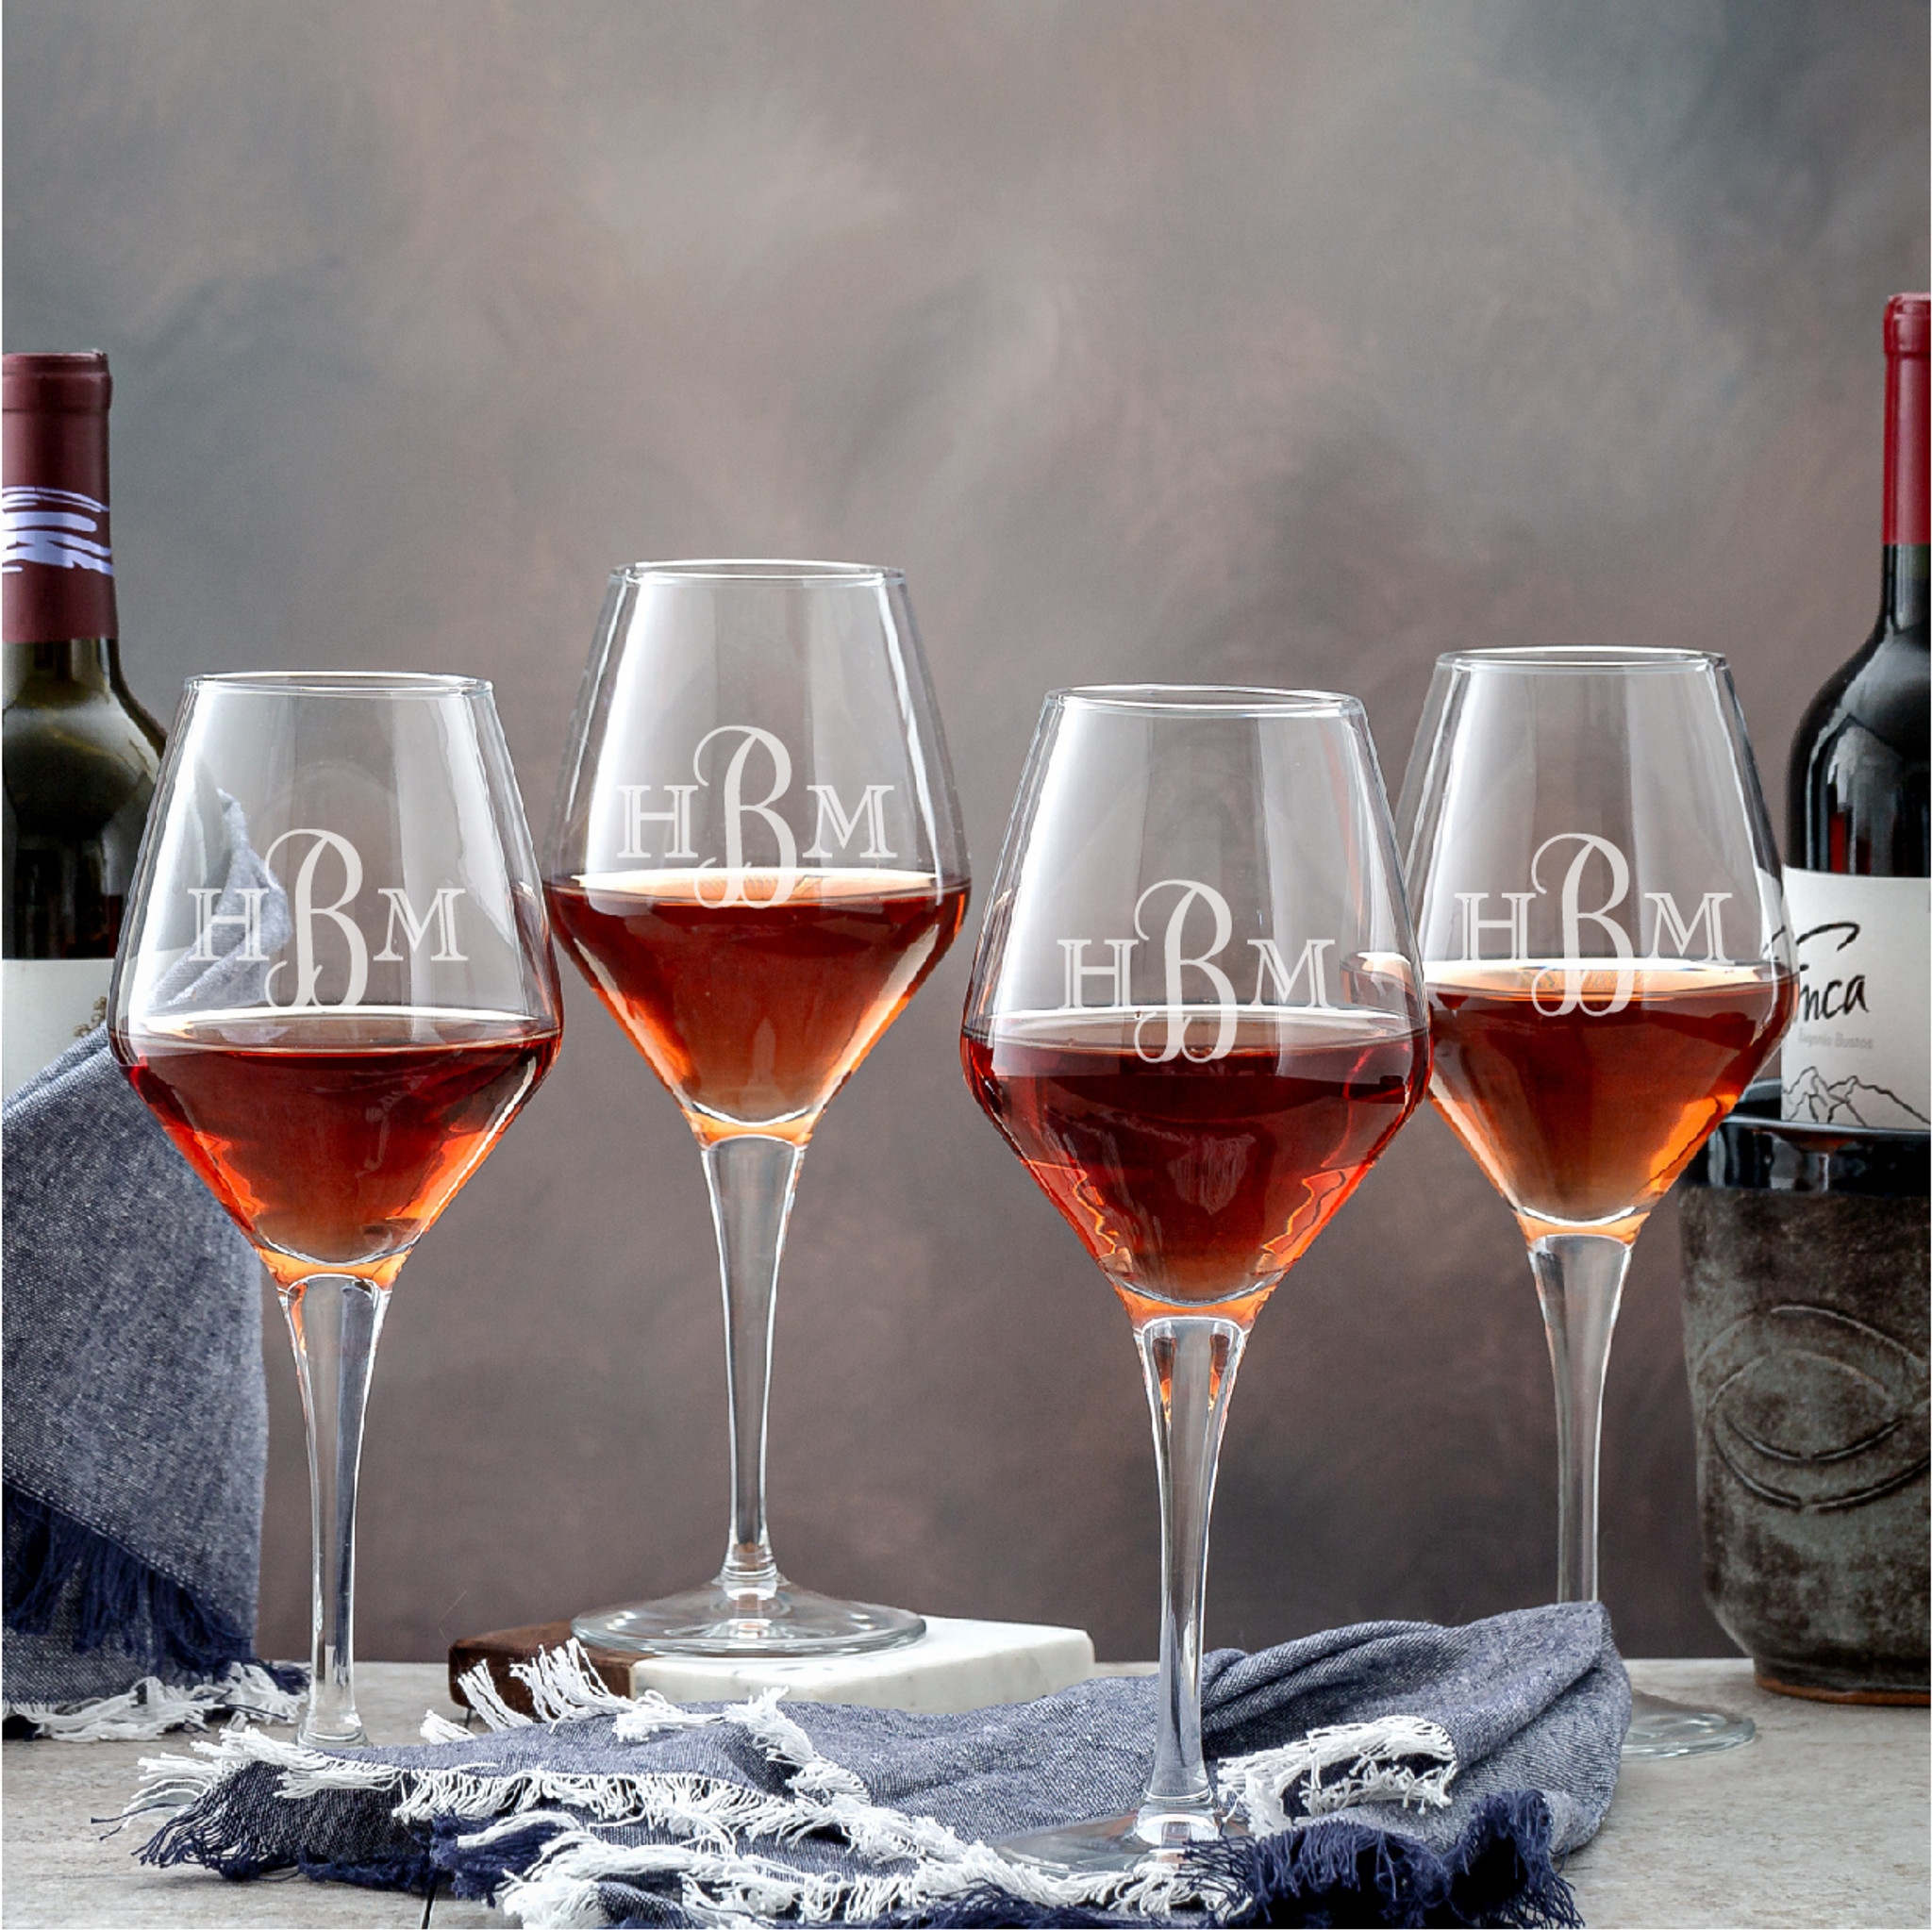 Personalized Crystal Wine Glasses - Great Birthday Gift